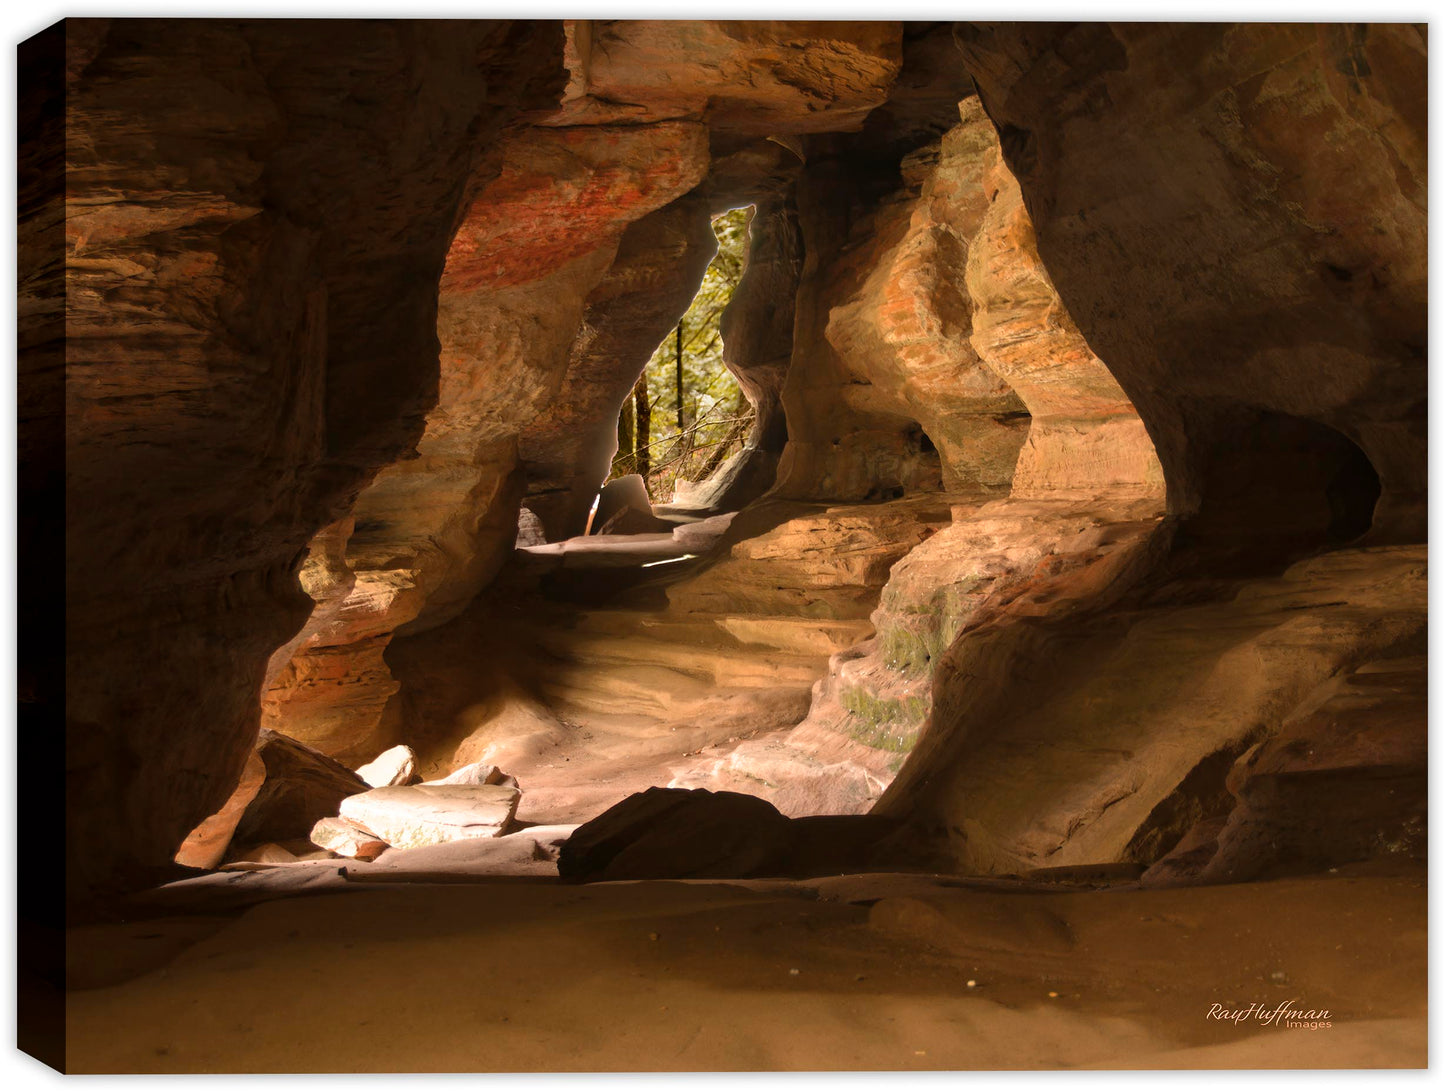 Into the Light -The Rock House - Hocking Hills